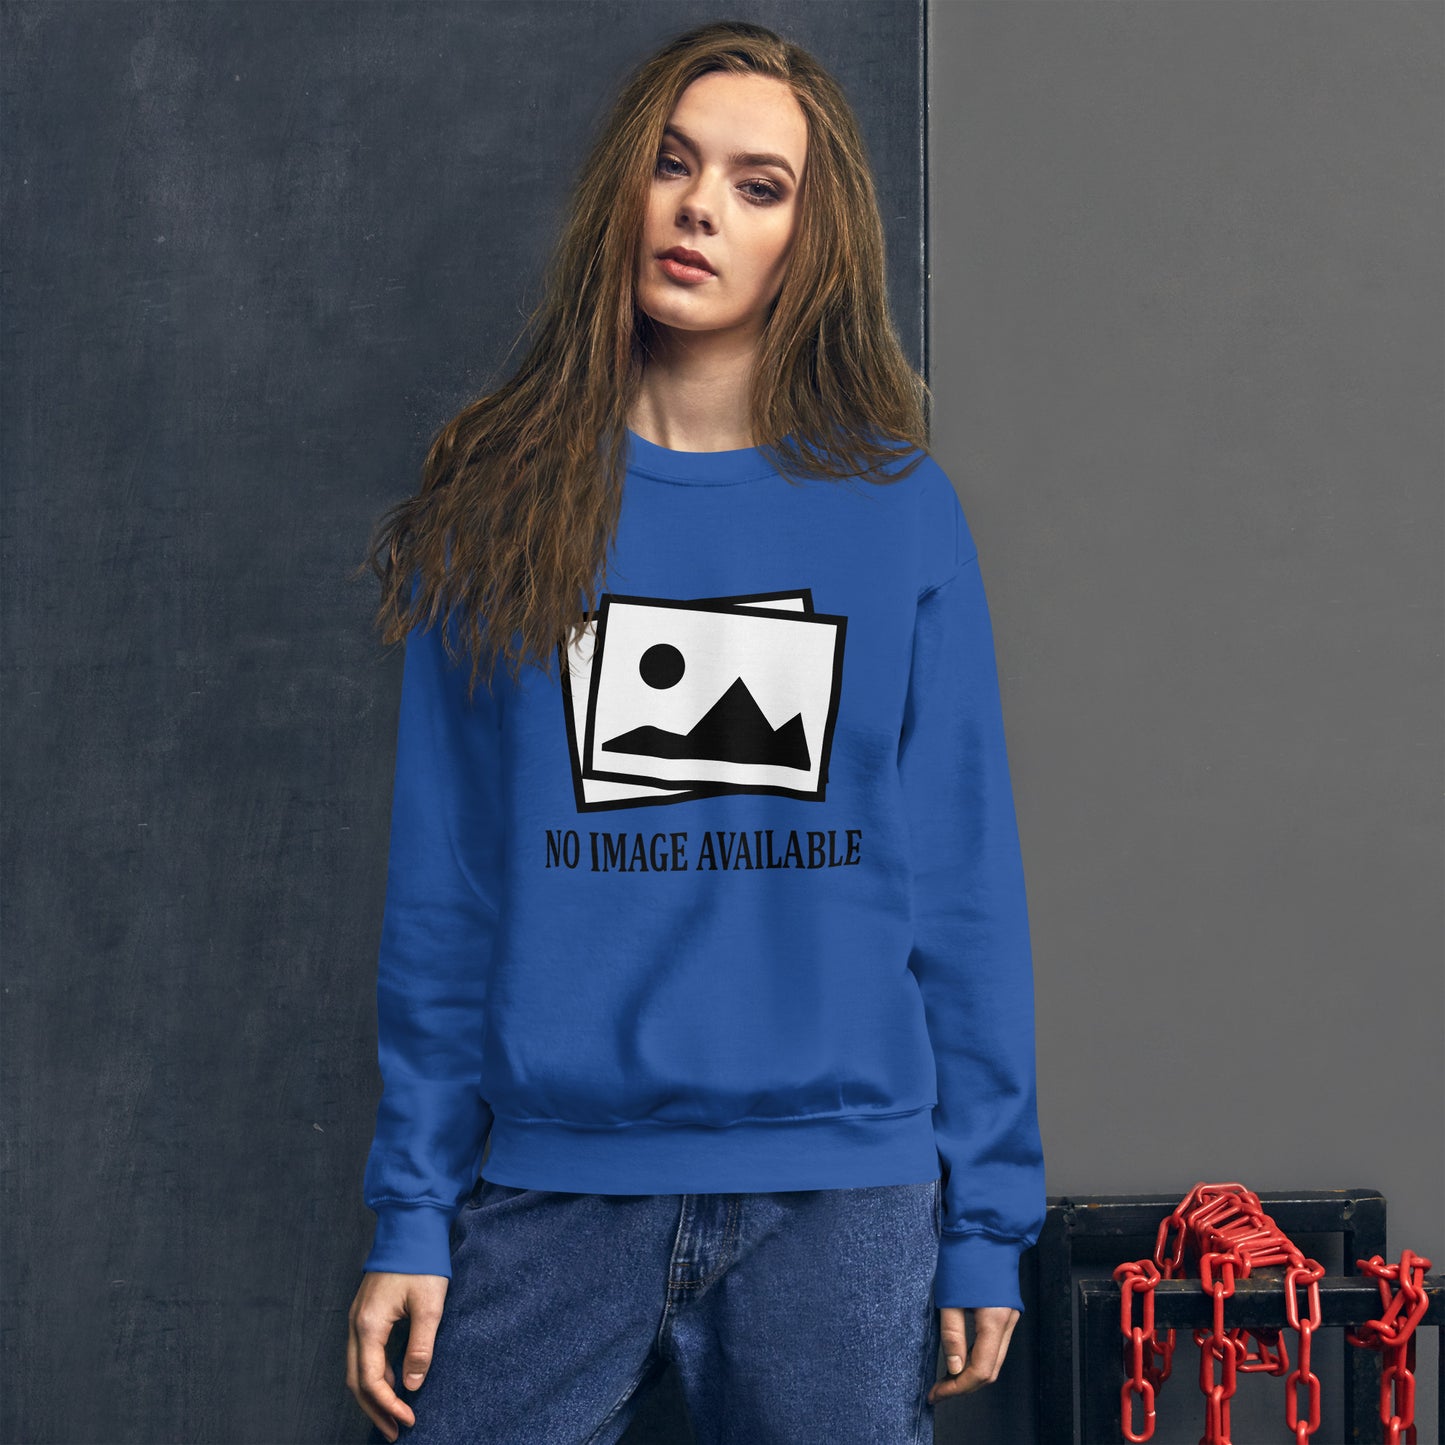 Women with royal blue sweatshirt with image and text "no image available"